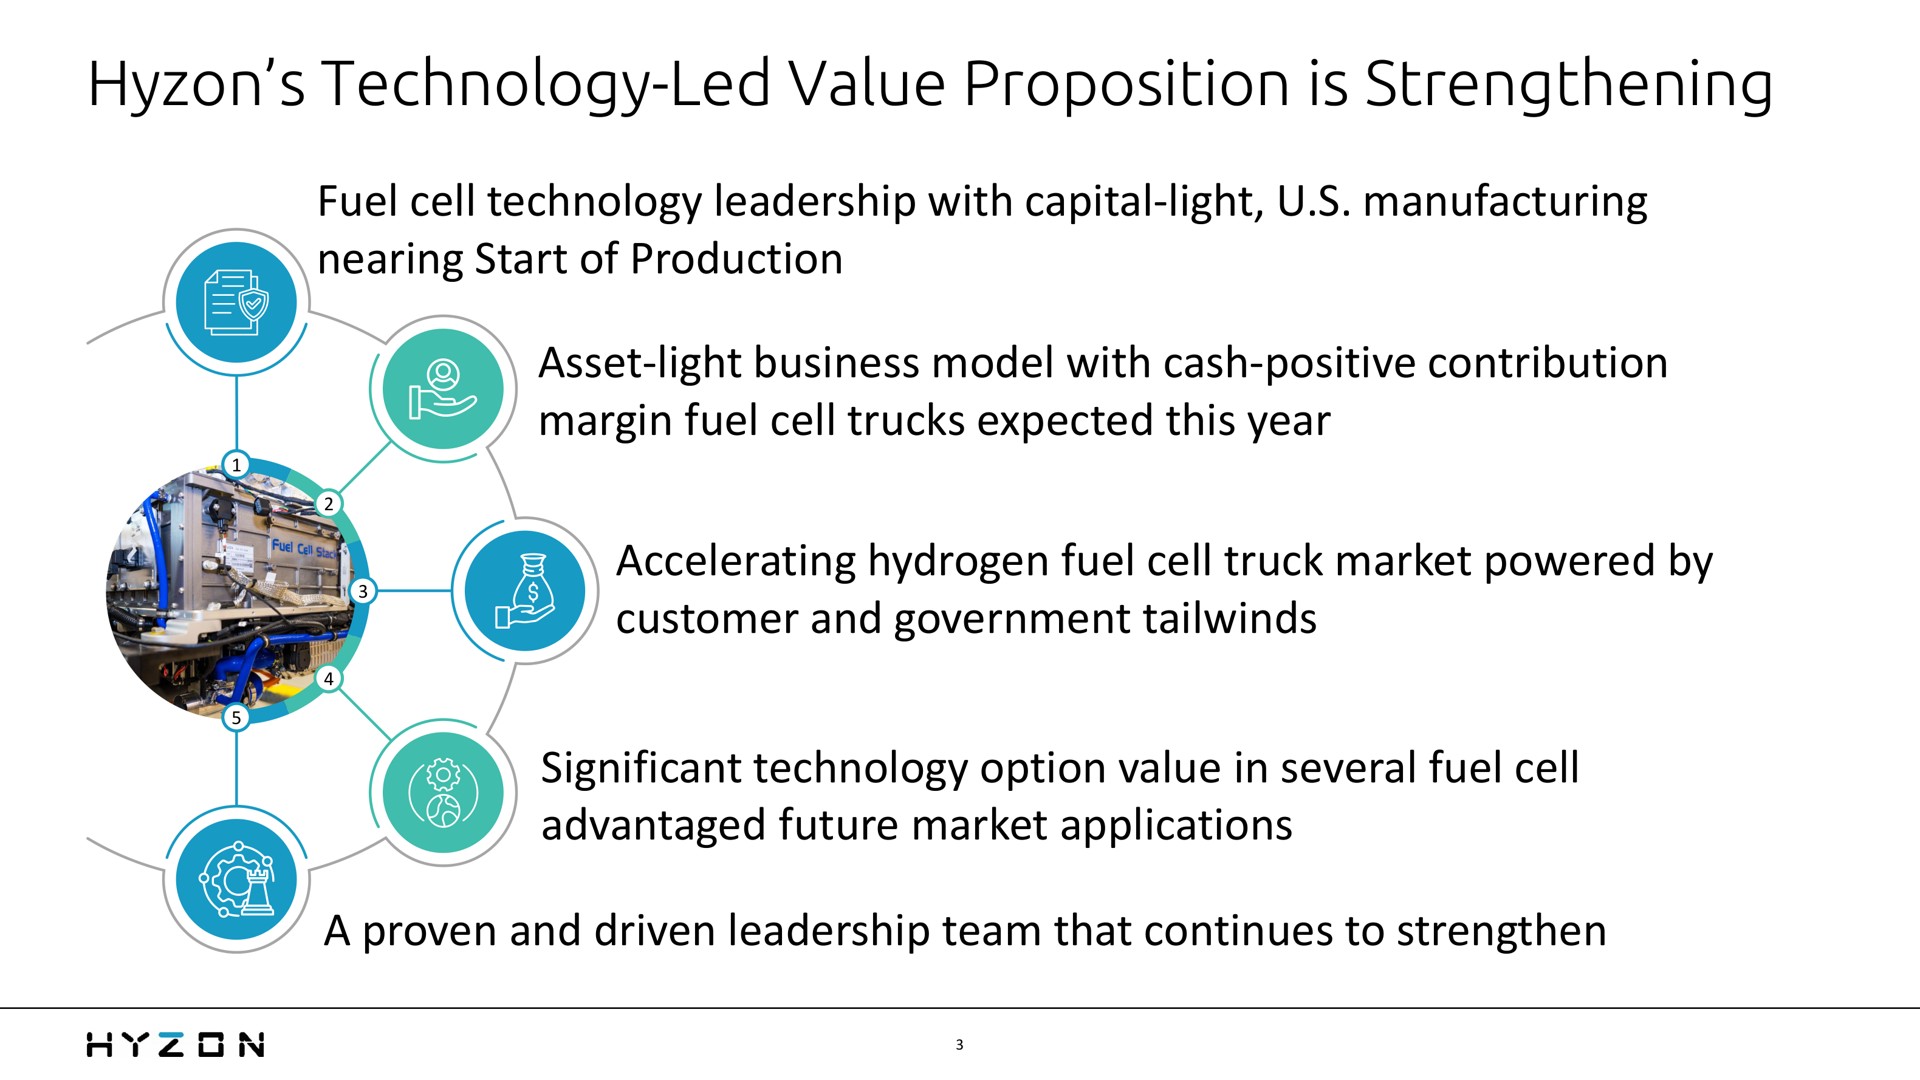 technology led value proposition is strengthening fuel cell technology leadership with capital light manufacturing nearing start of production asset light business model with cash positive contribution margin fuel cell trucks expected this year accelerating hydrogen fuel cell truck market powered by customer and government significant technology option value in several fuel cell advantaged future market applications a proven and driven leadership team that continues to strengthen | Hyzon